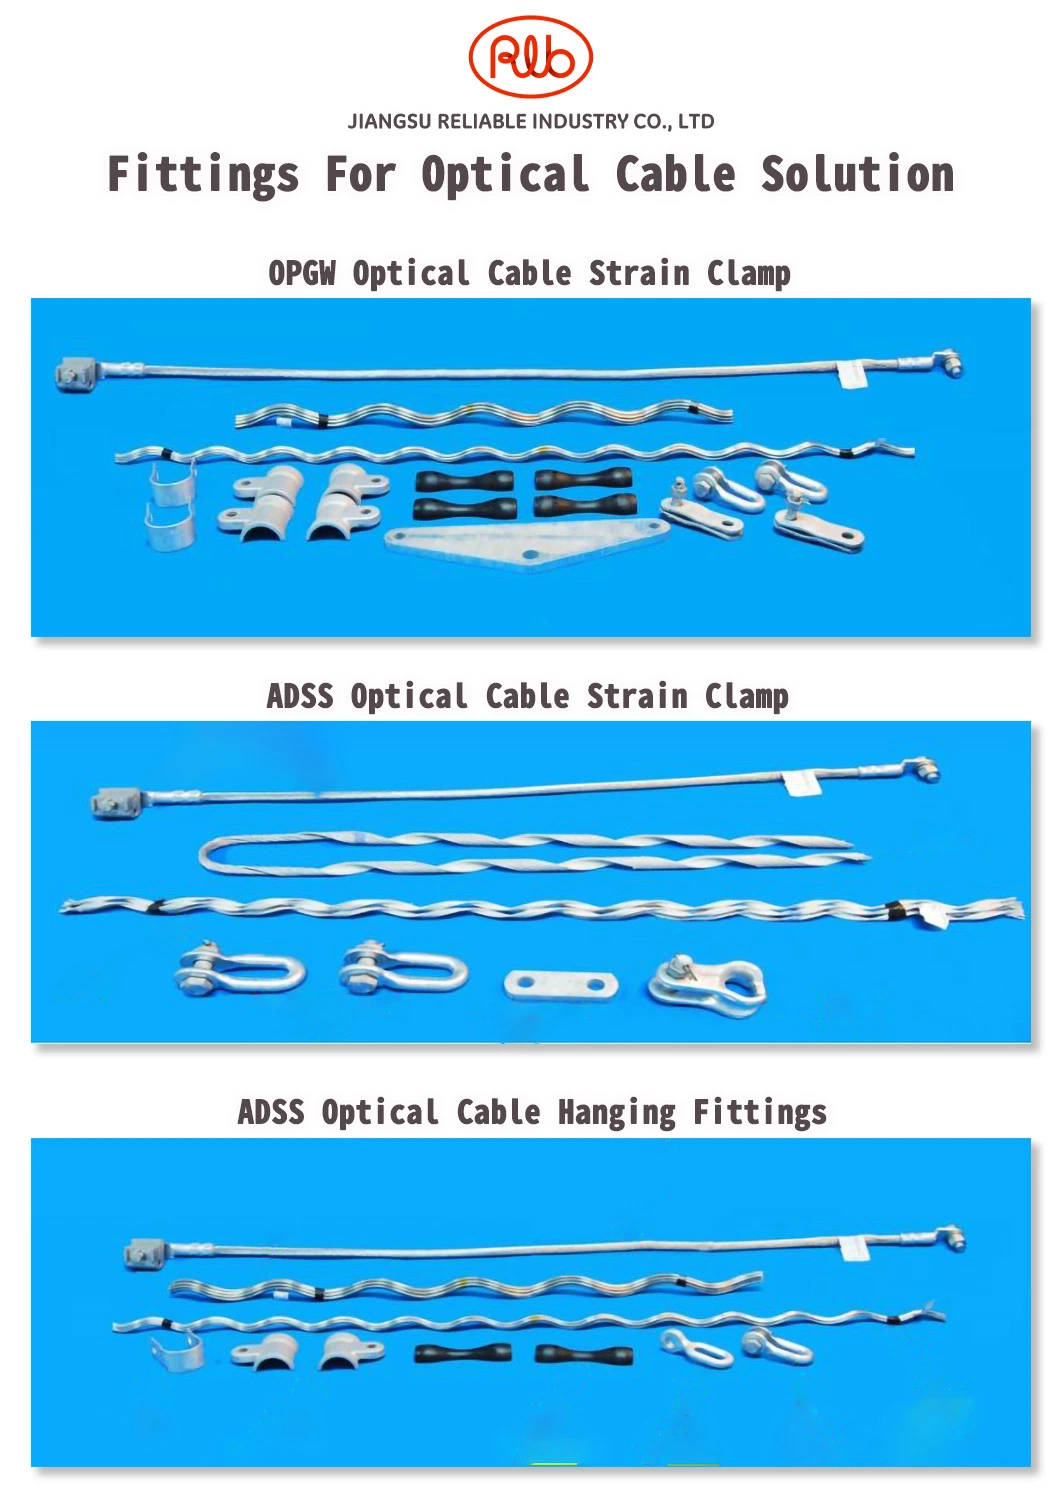 Electric Power Insulated Hanging Fittings for Opgw/ADSS Optical Cable